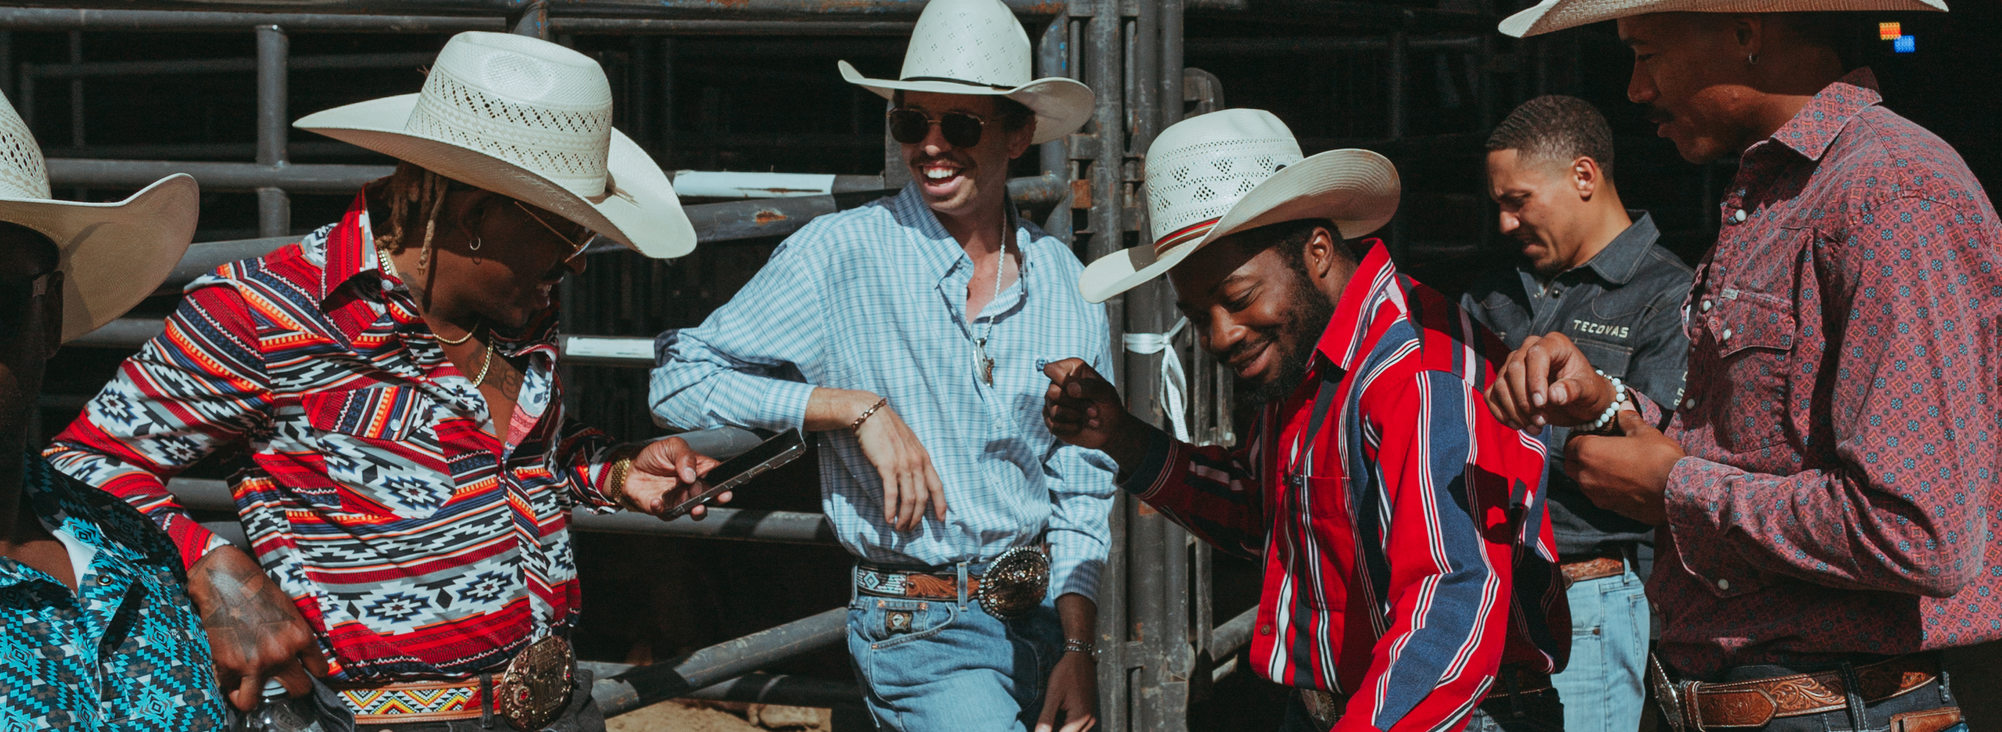 A group of rodeo participants wearing brightly-colored Western-style shirts and cowboy hats smile and dance near the metal animal corrals at Expo Center.